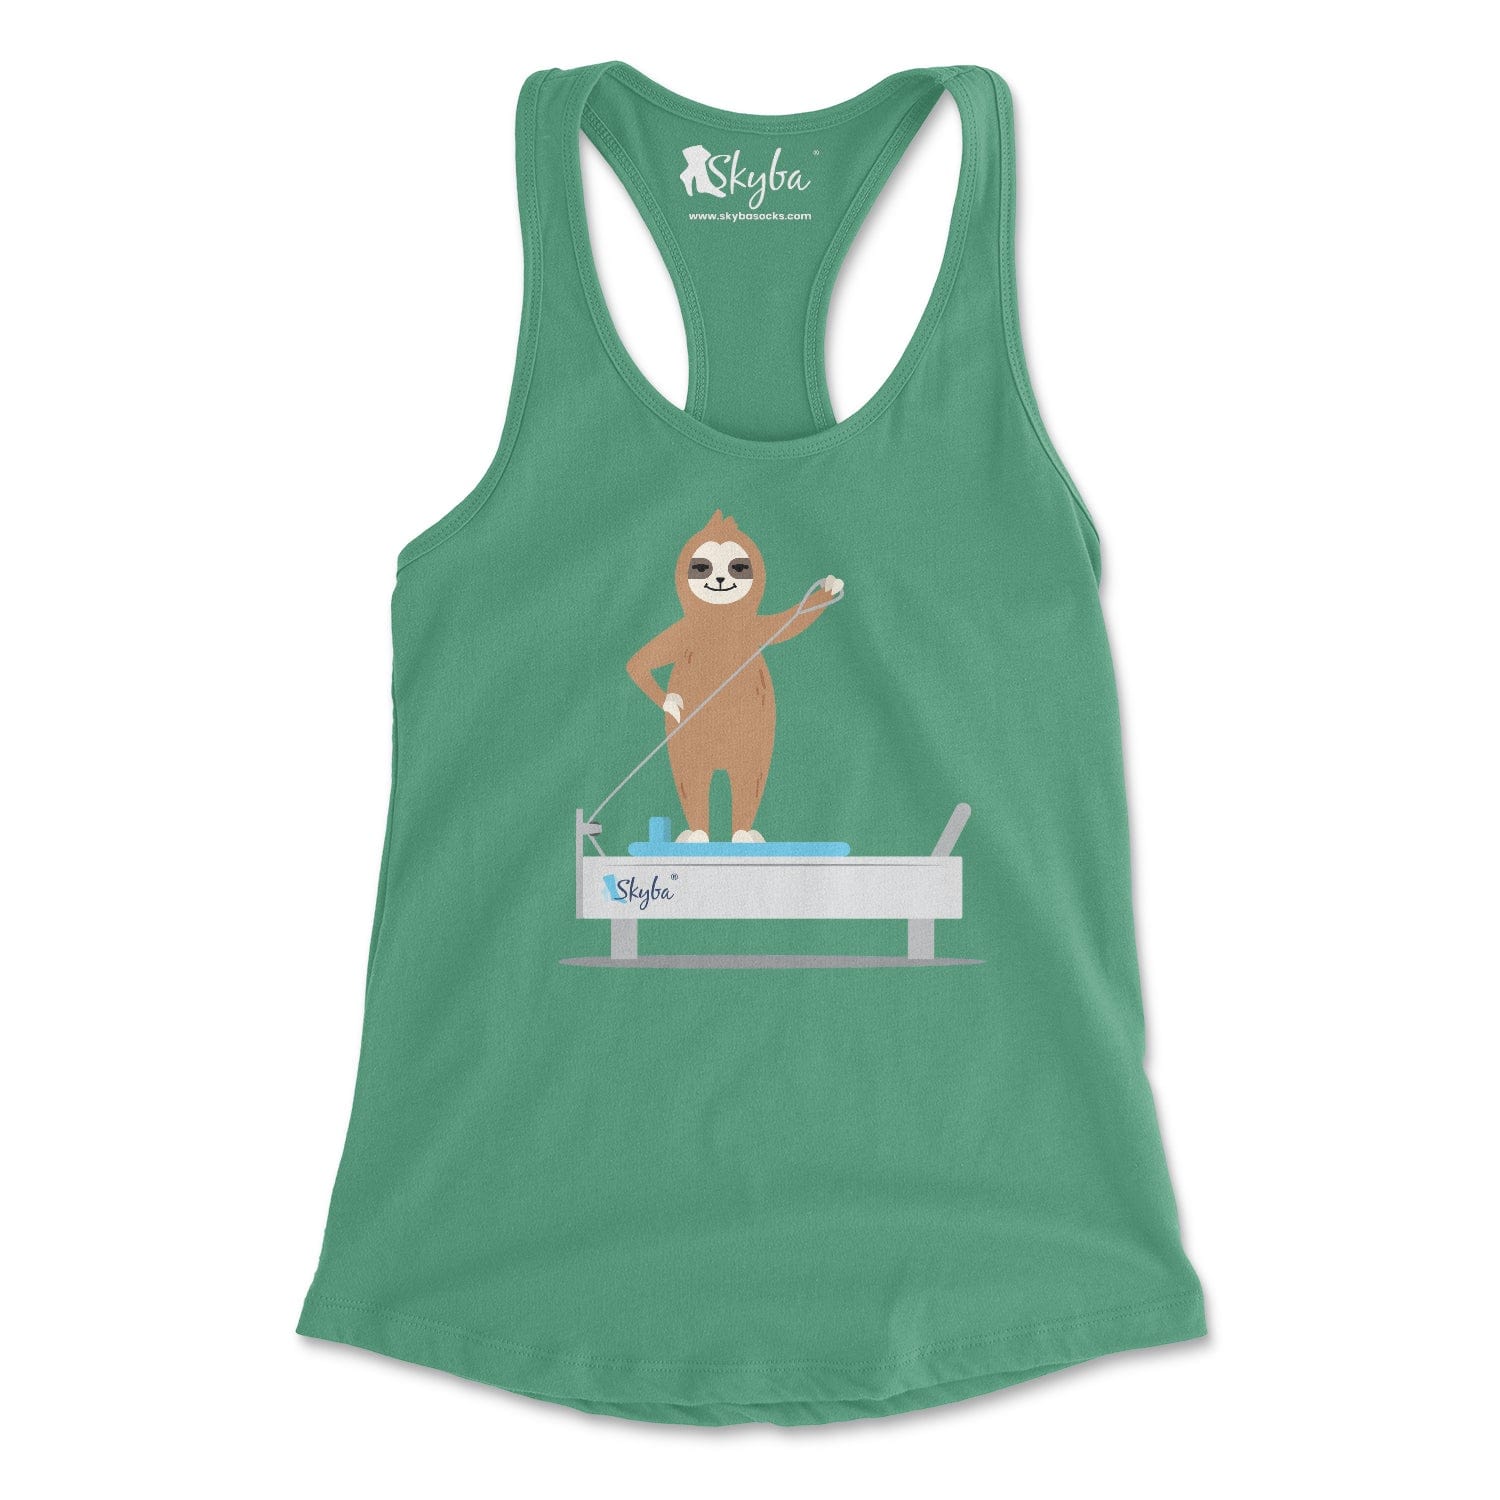 Sloth on the Reformer - Slim Fit Tank Skyba Tank Top